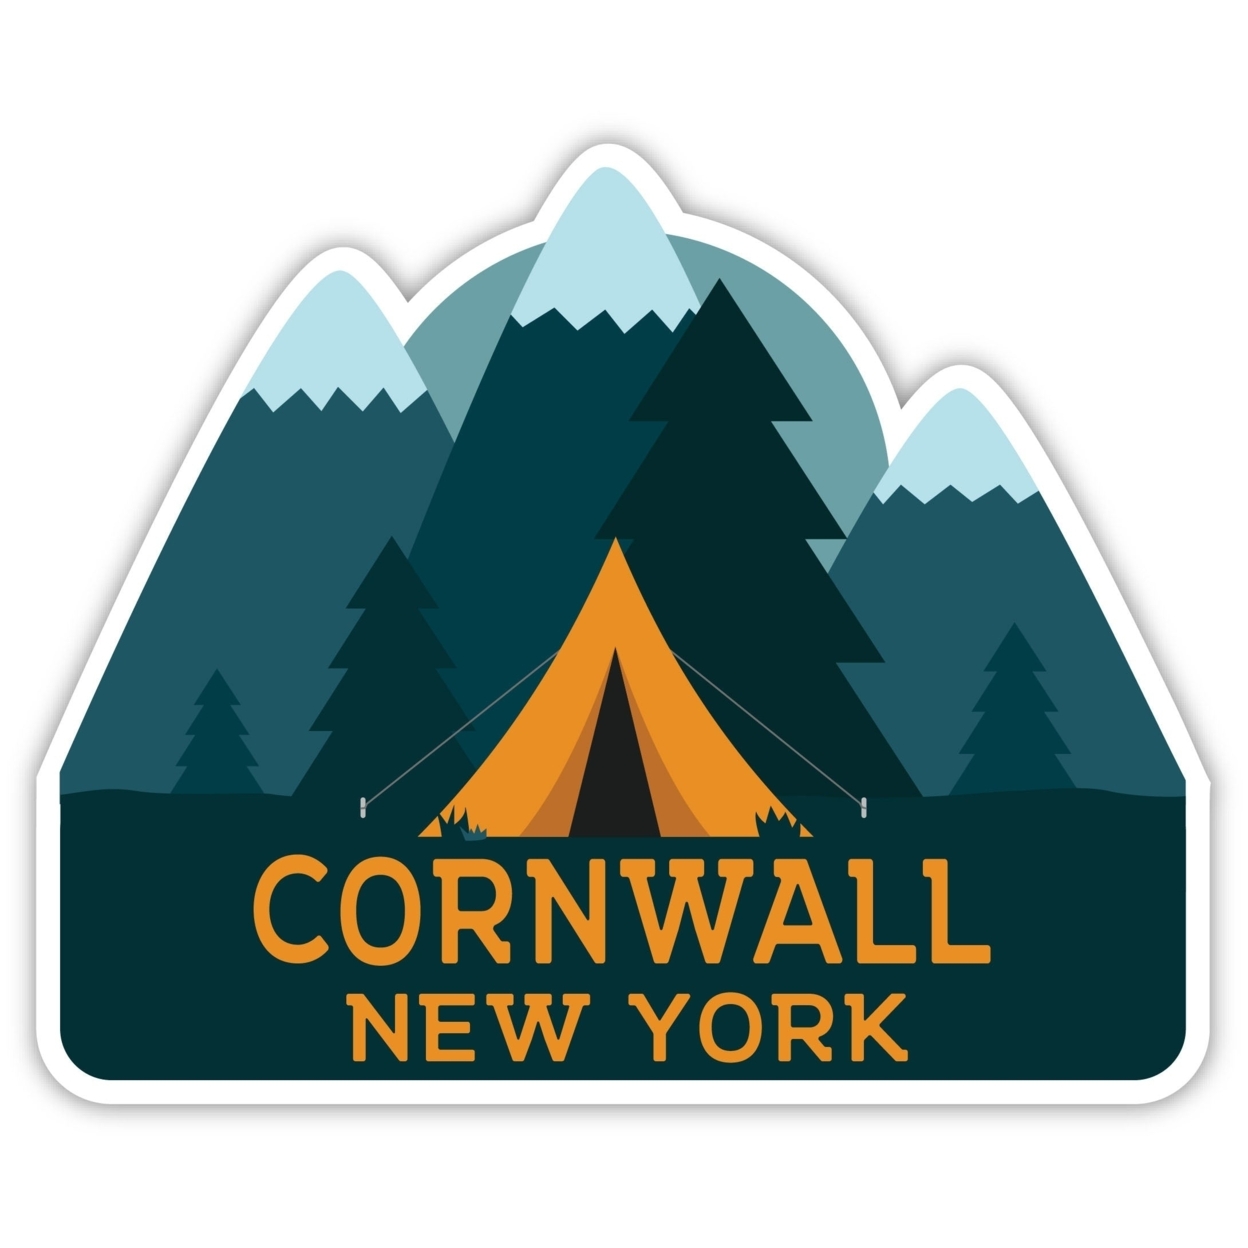 Cornwall New York Souvenir Decorative Stickers (Choose Theme And Size) - Single Unit, 6-Inch, Tent